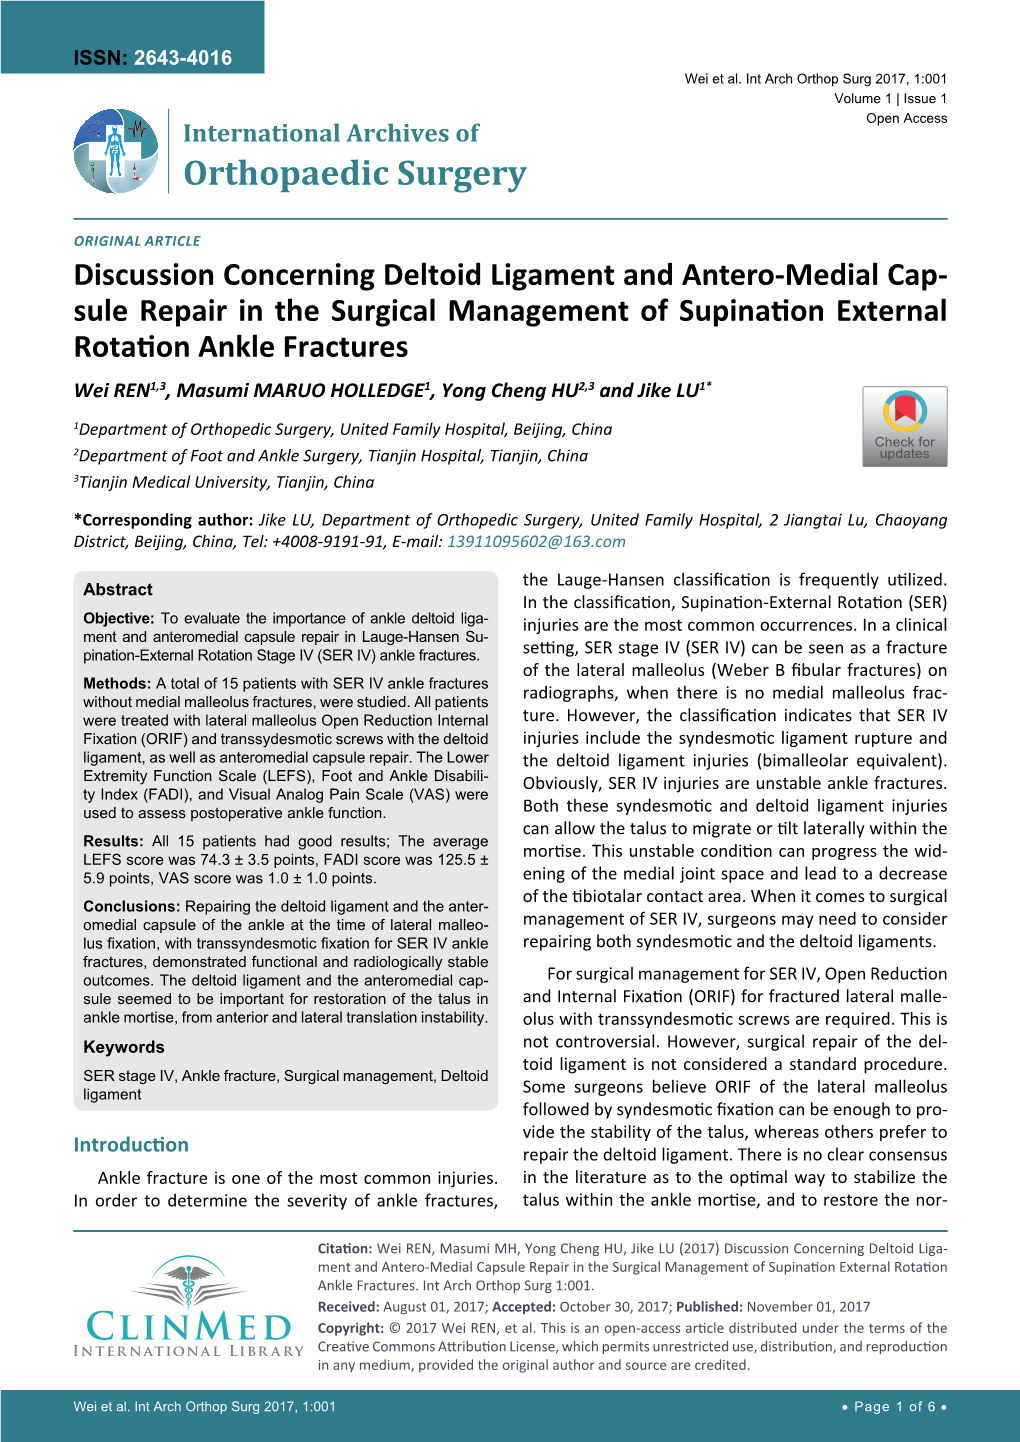 Discussion Concerning Deltoid Ligament and Antero-Medial Capsule Repair in the Surgical Management of Supination External Rotati